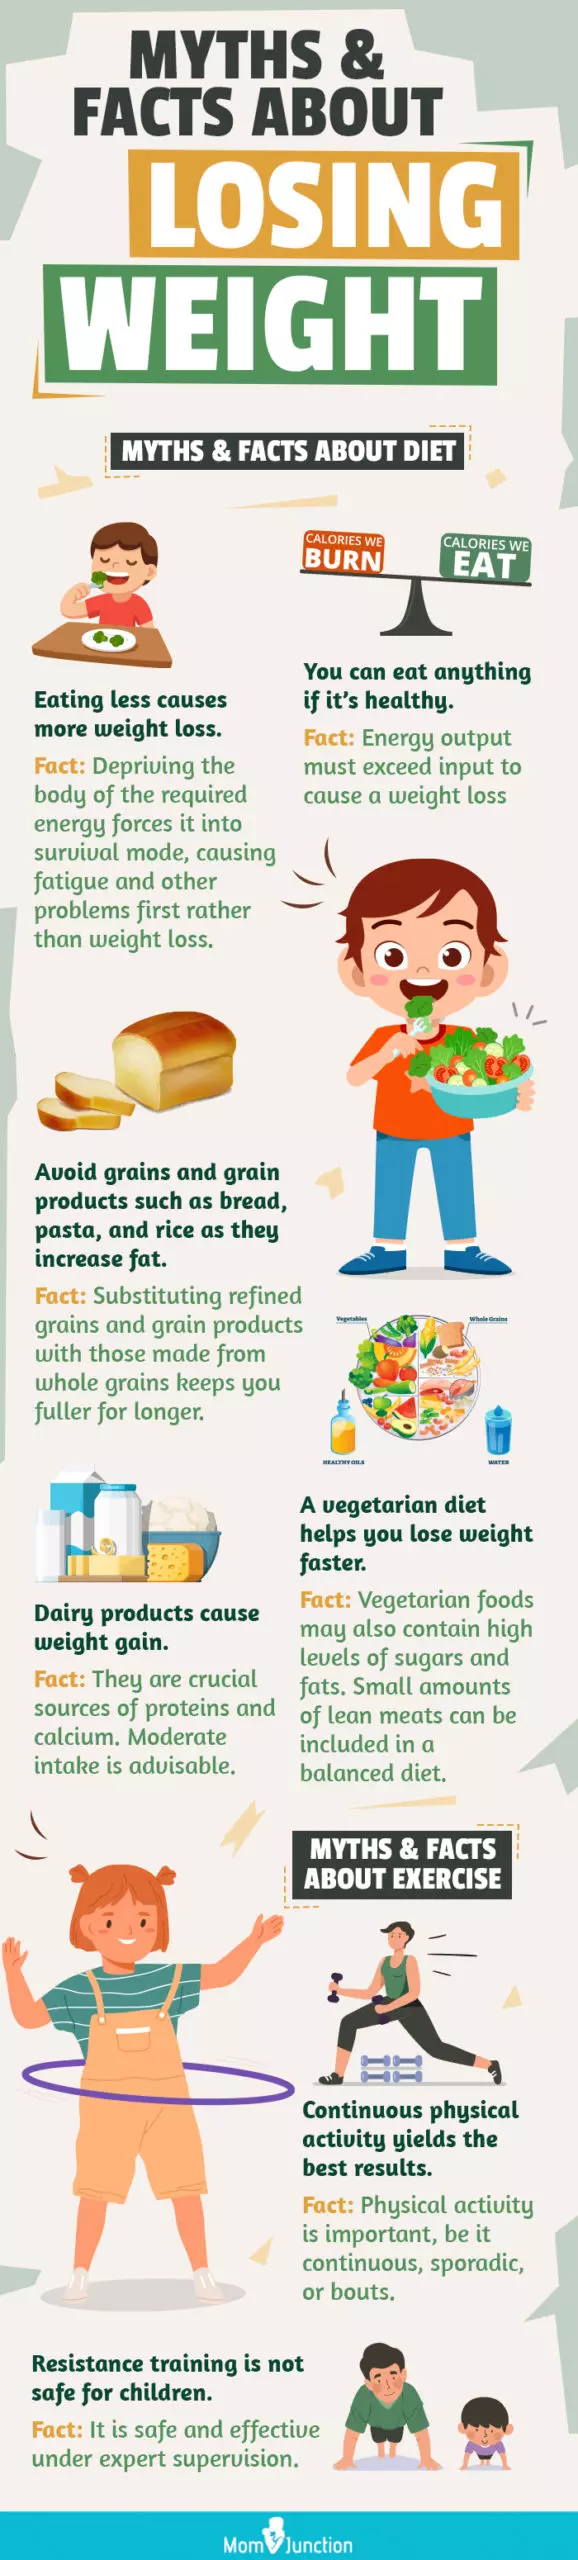 myths and facts about losing weight (infographic)